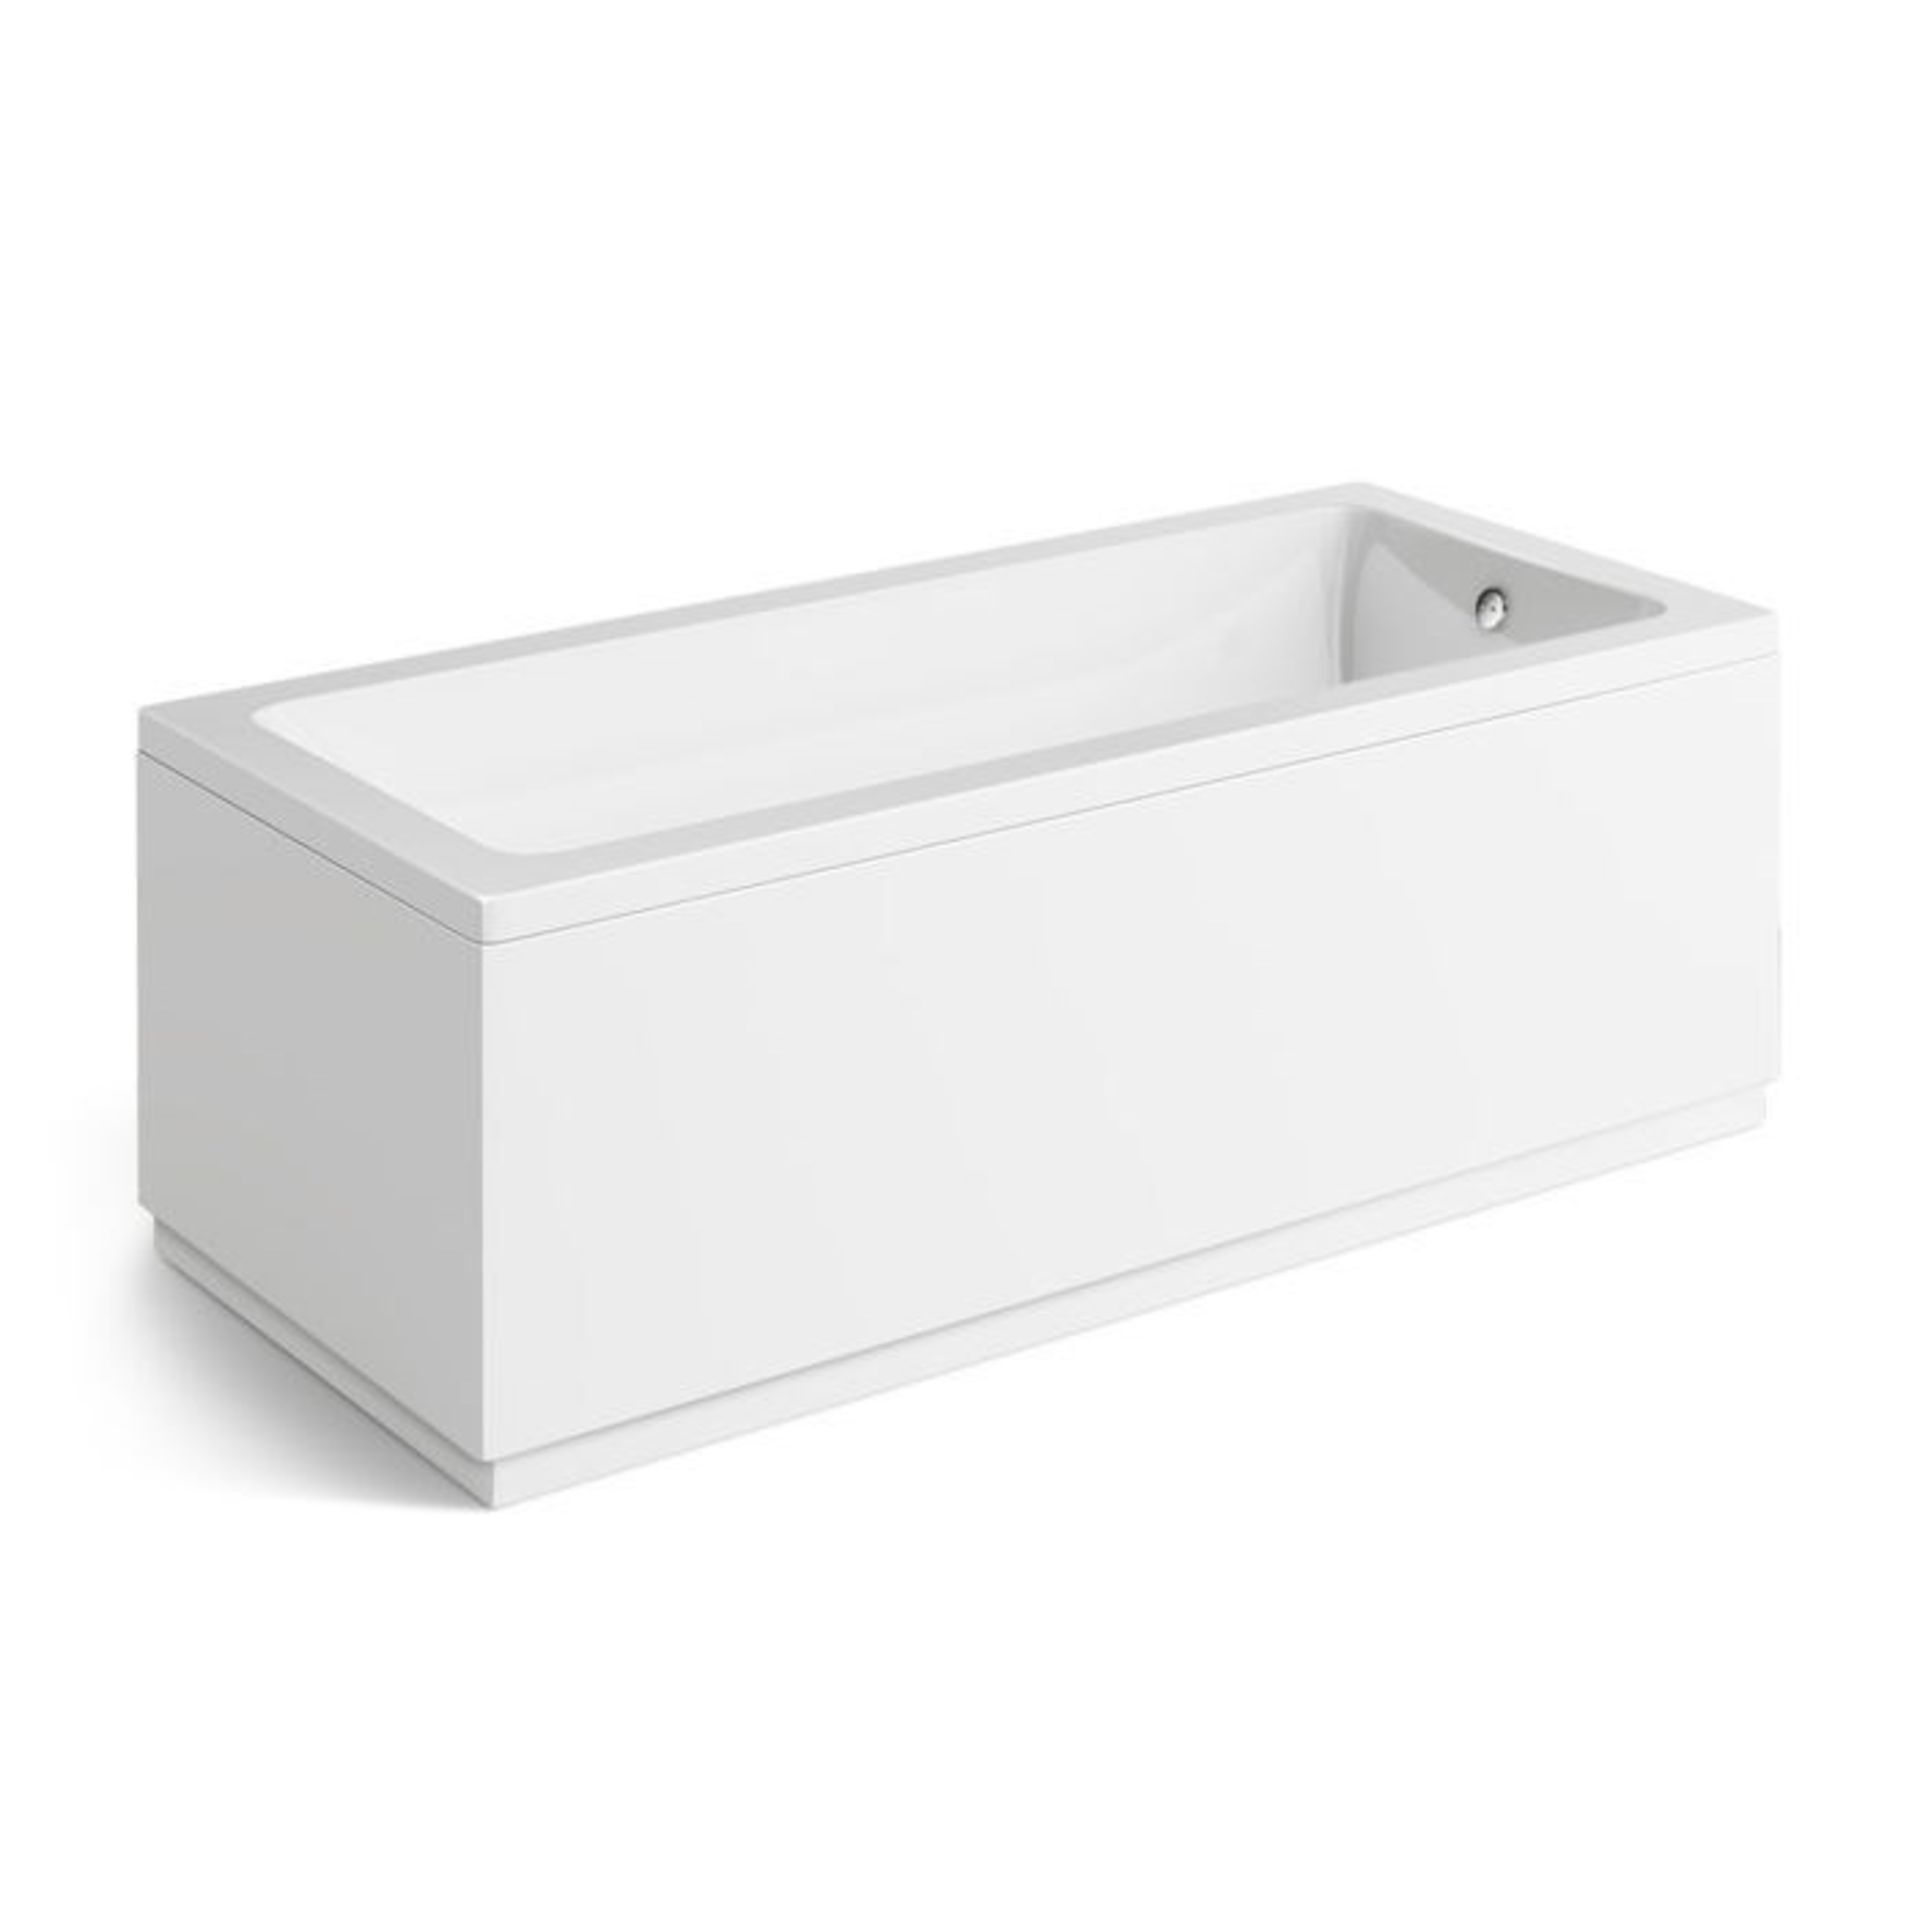 (RC39) 1700x700mm Square Single Ended Bath. Manufactured in the UK Sanitary grade cell cast re-... - Image 3 of 3